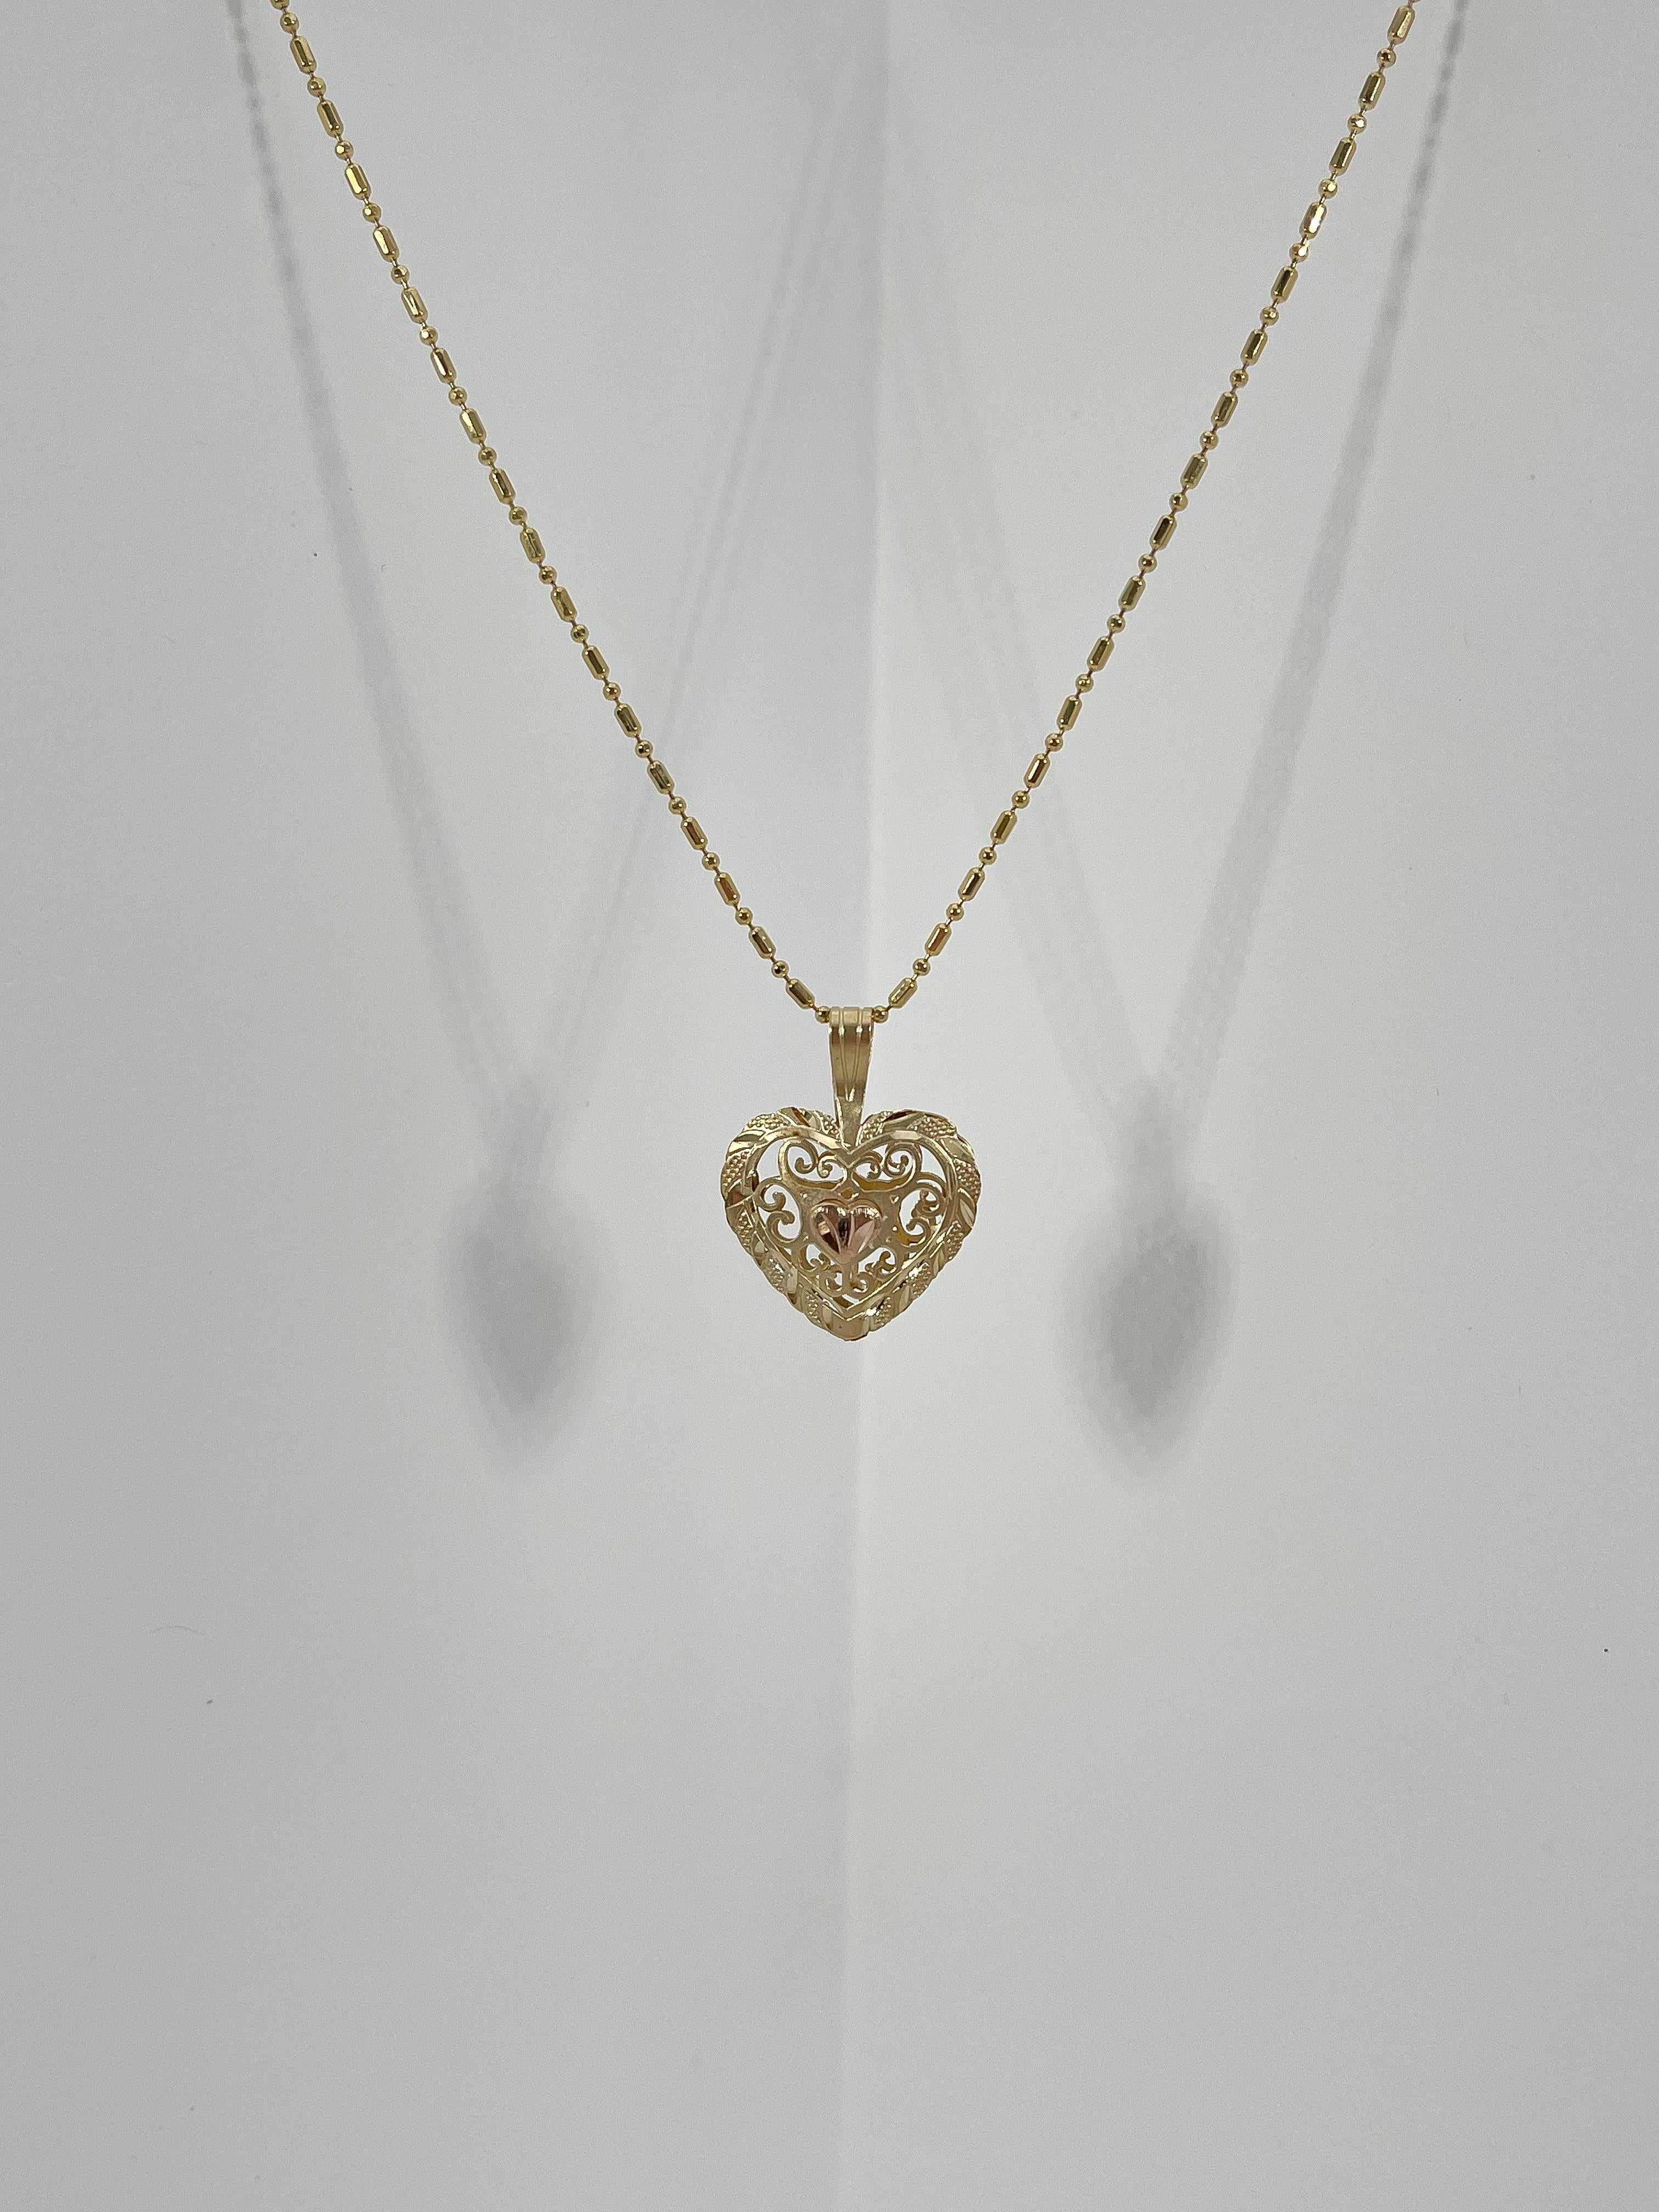 14k yellow and rose gold filigree heart pendant necklace. The pendant comes on a 20 inch beaded chain, has a spring ring clasp to open and close, the pendant measures to be 16.5mm x 17.5mm, and has a total weight of 4.2 grams.